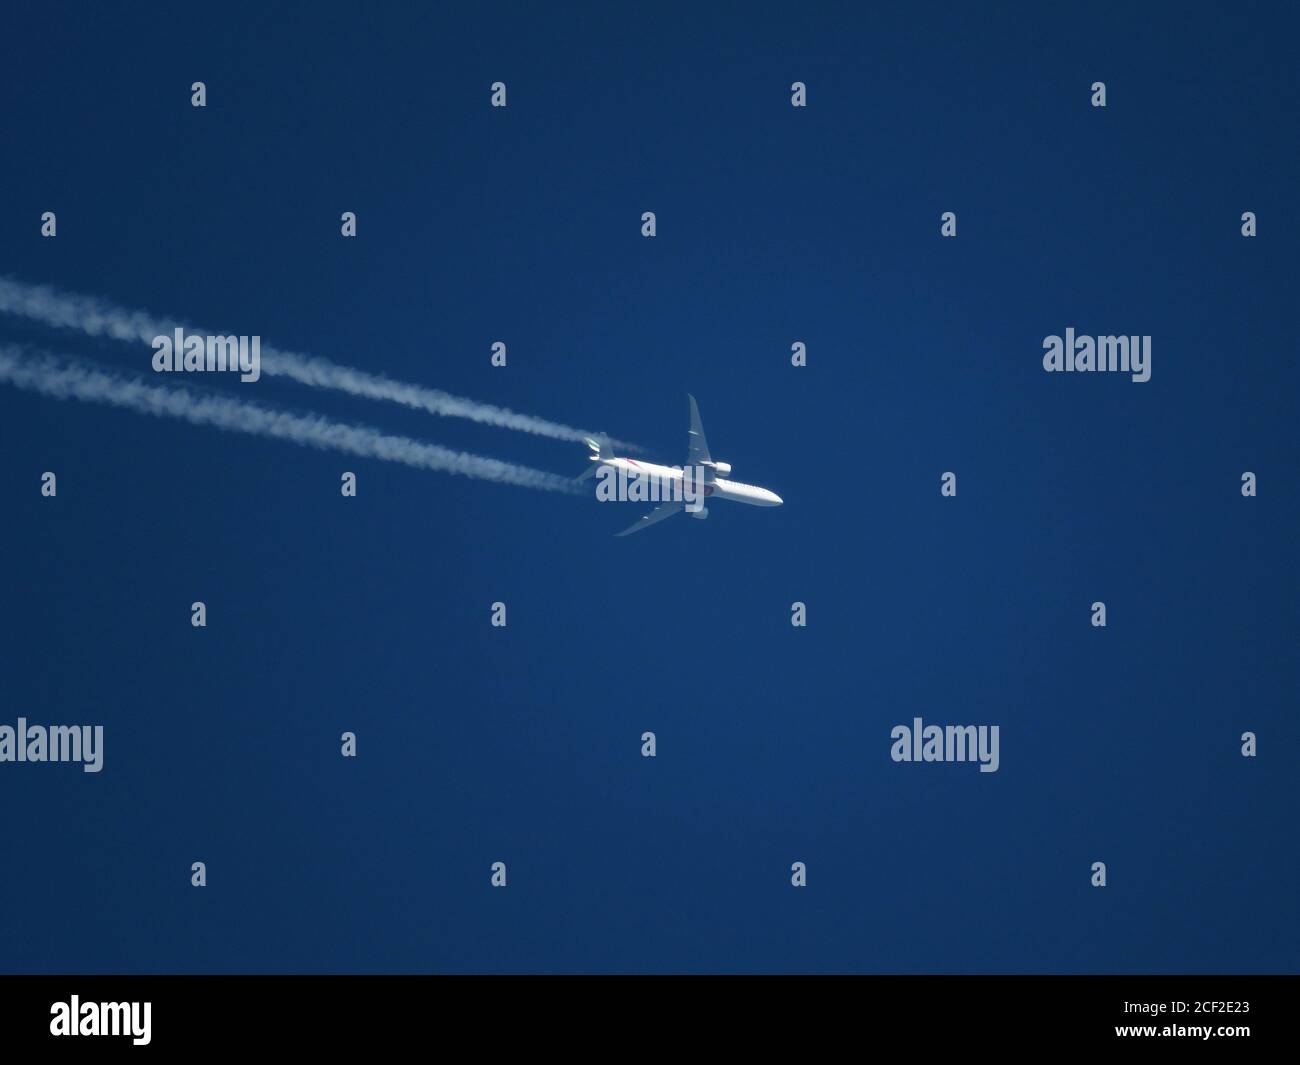 Tele close up of Emirates Jet airliner flying at high altitude in a clear blue sky with contrails Stock Photo